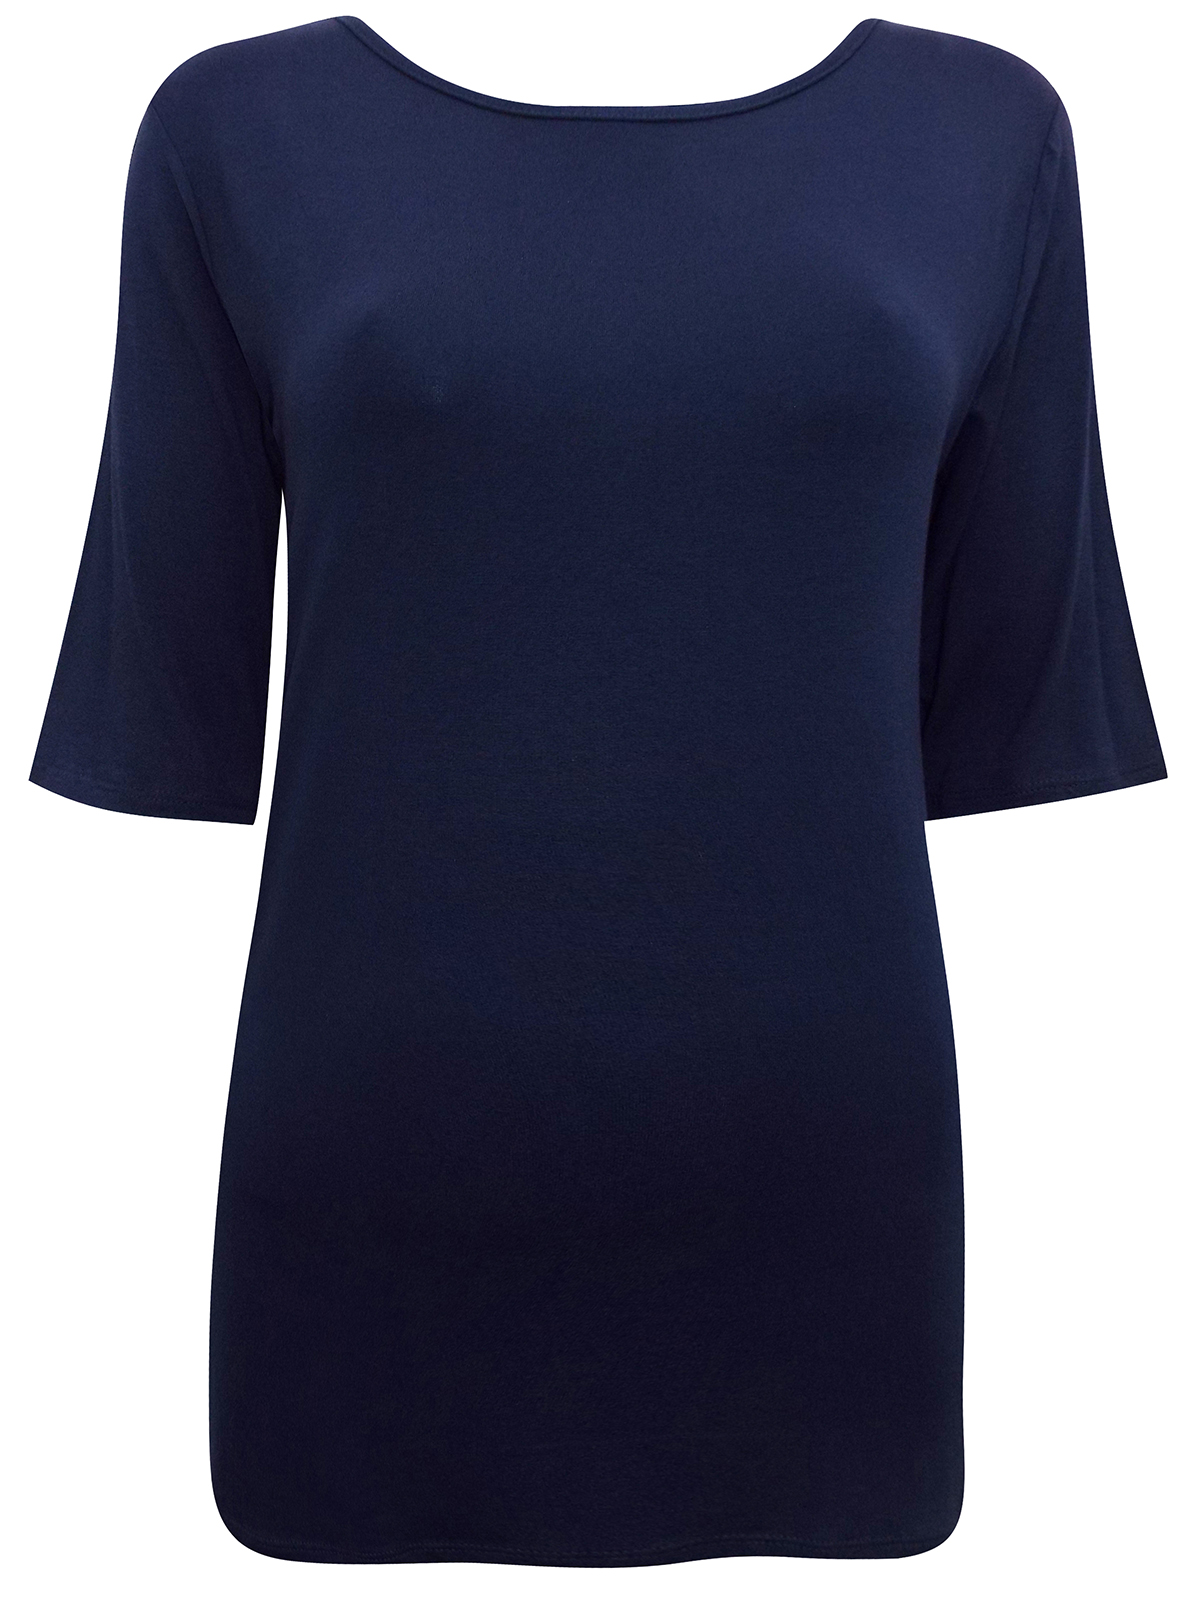 First Avenue NAVY Half Sleeve Jersey Top - Size 12 to 18